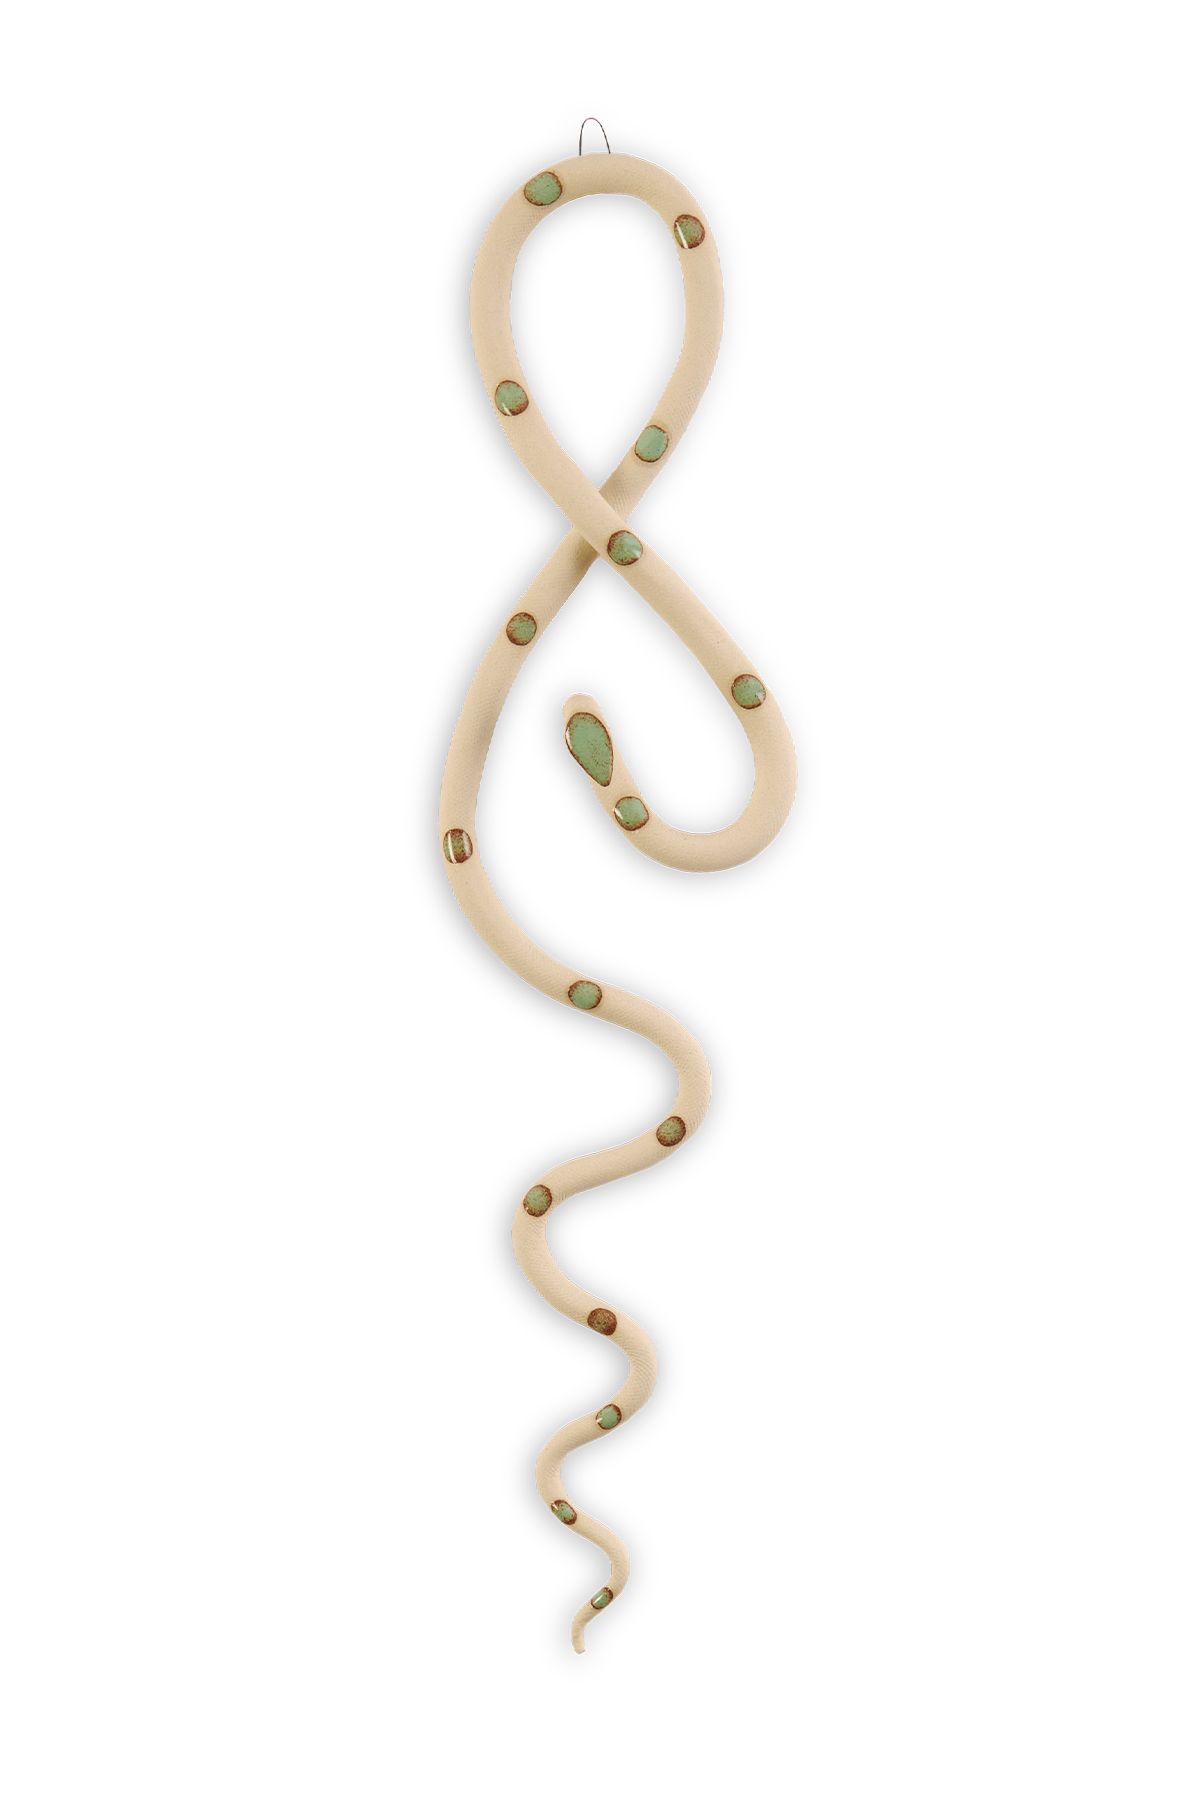 Sylvia Ceramic Wall Snake from Favor the Kind